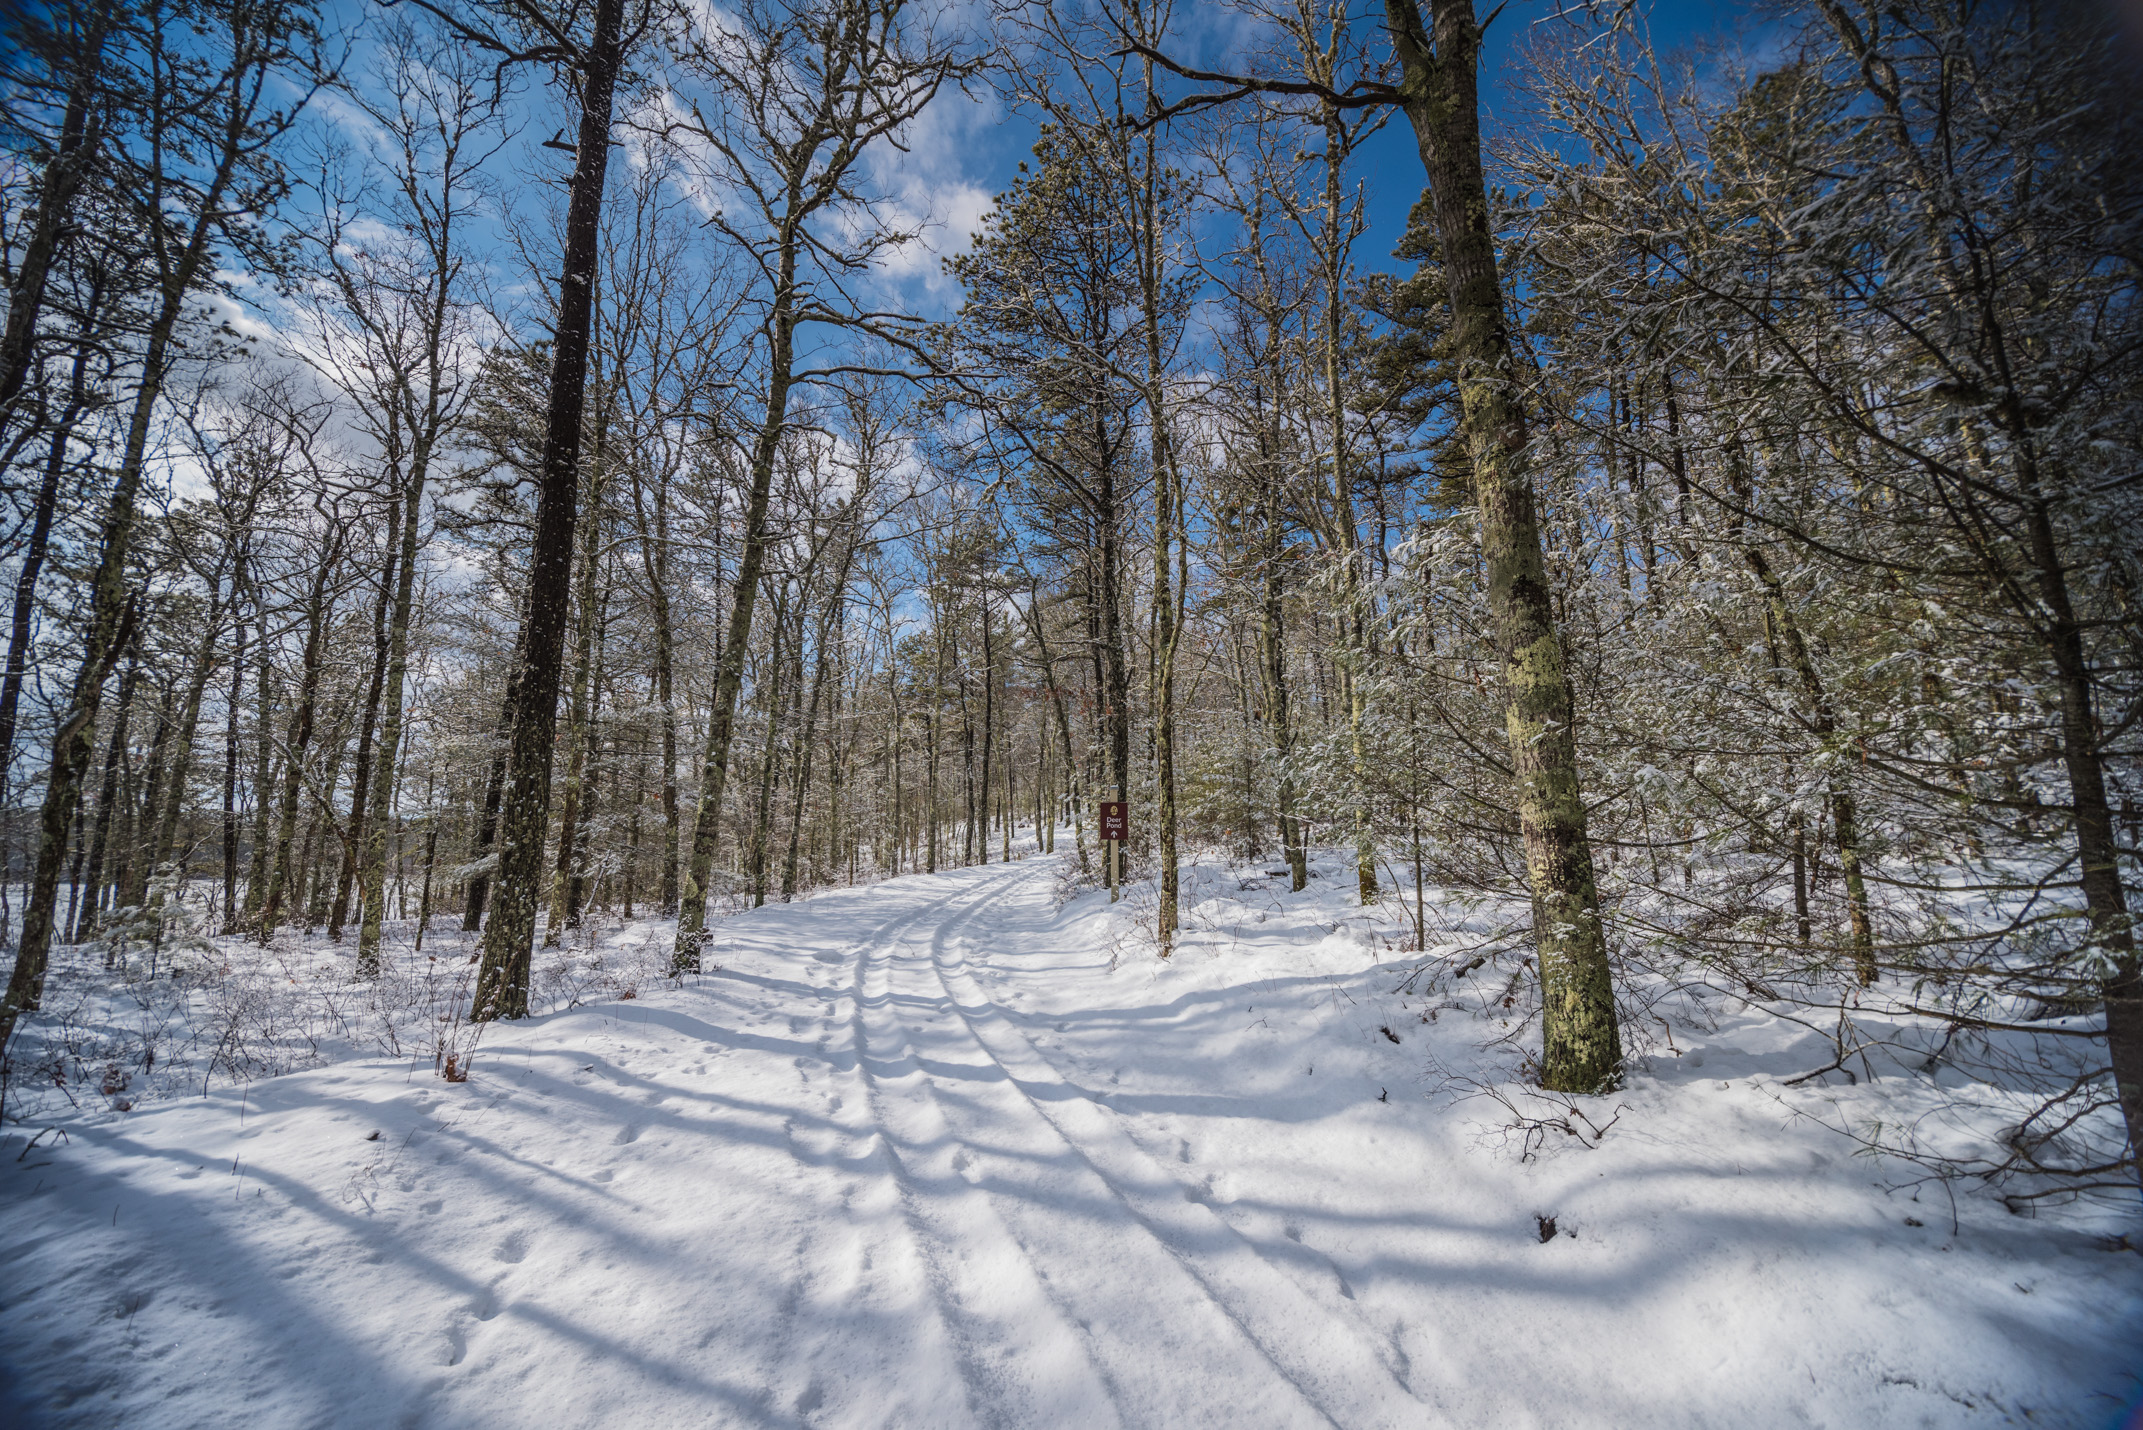 The snowy trail in Plymouth, Massachusetts